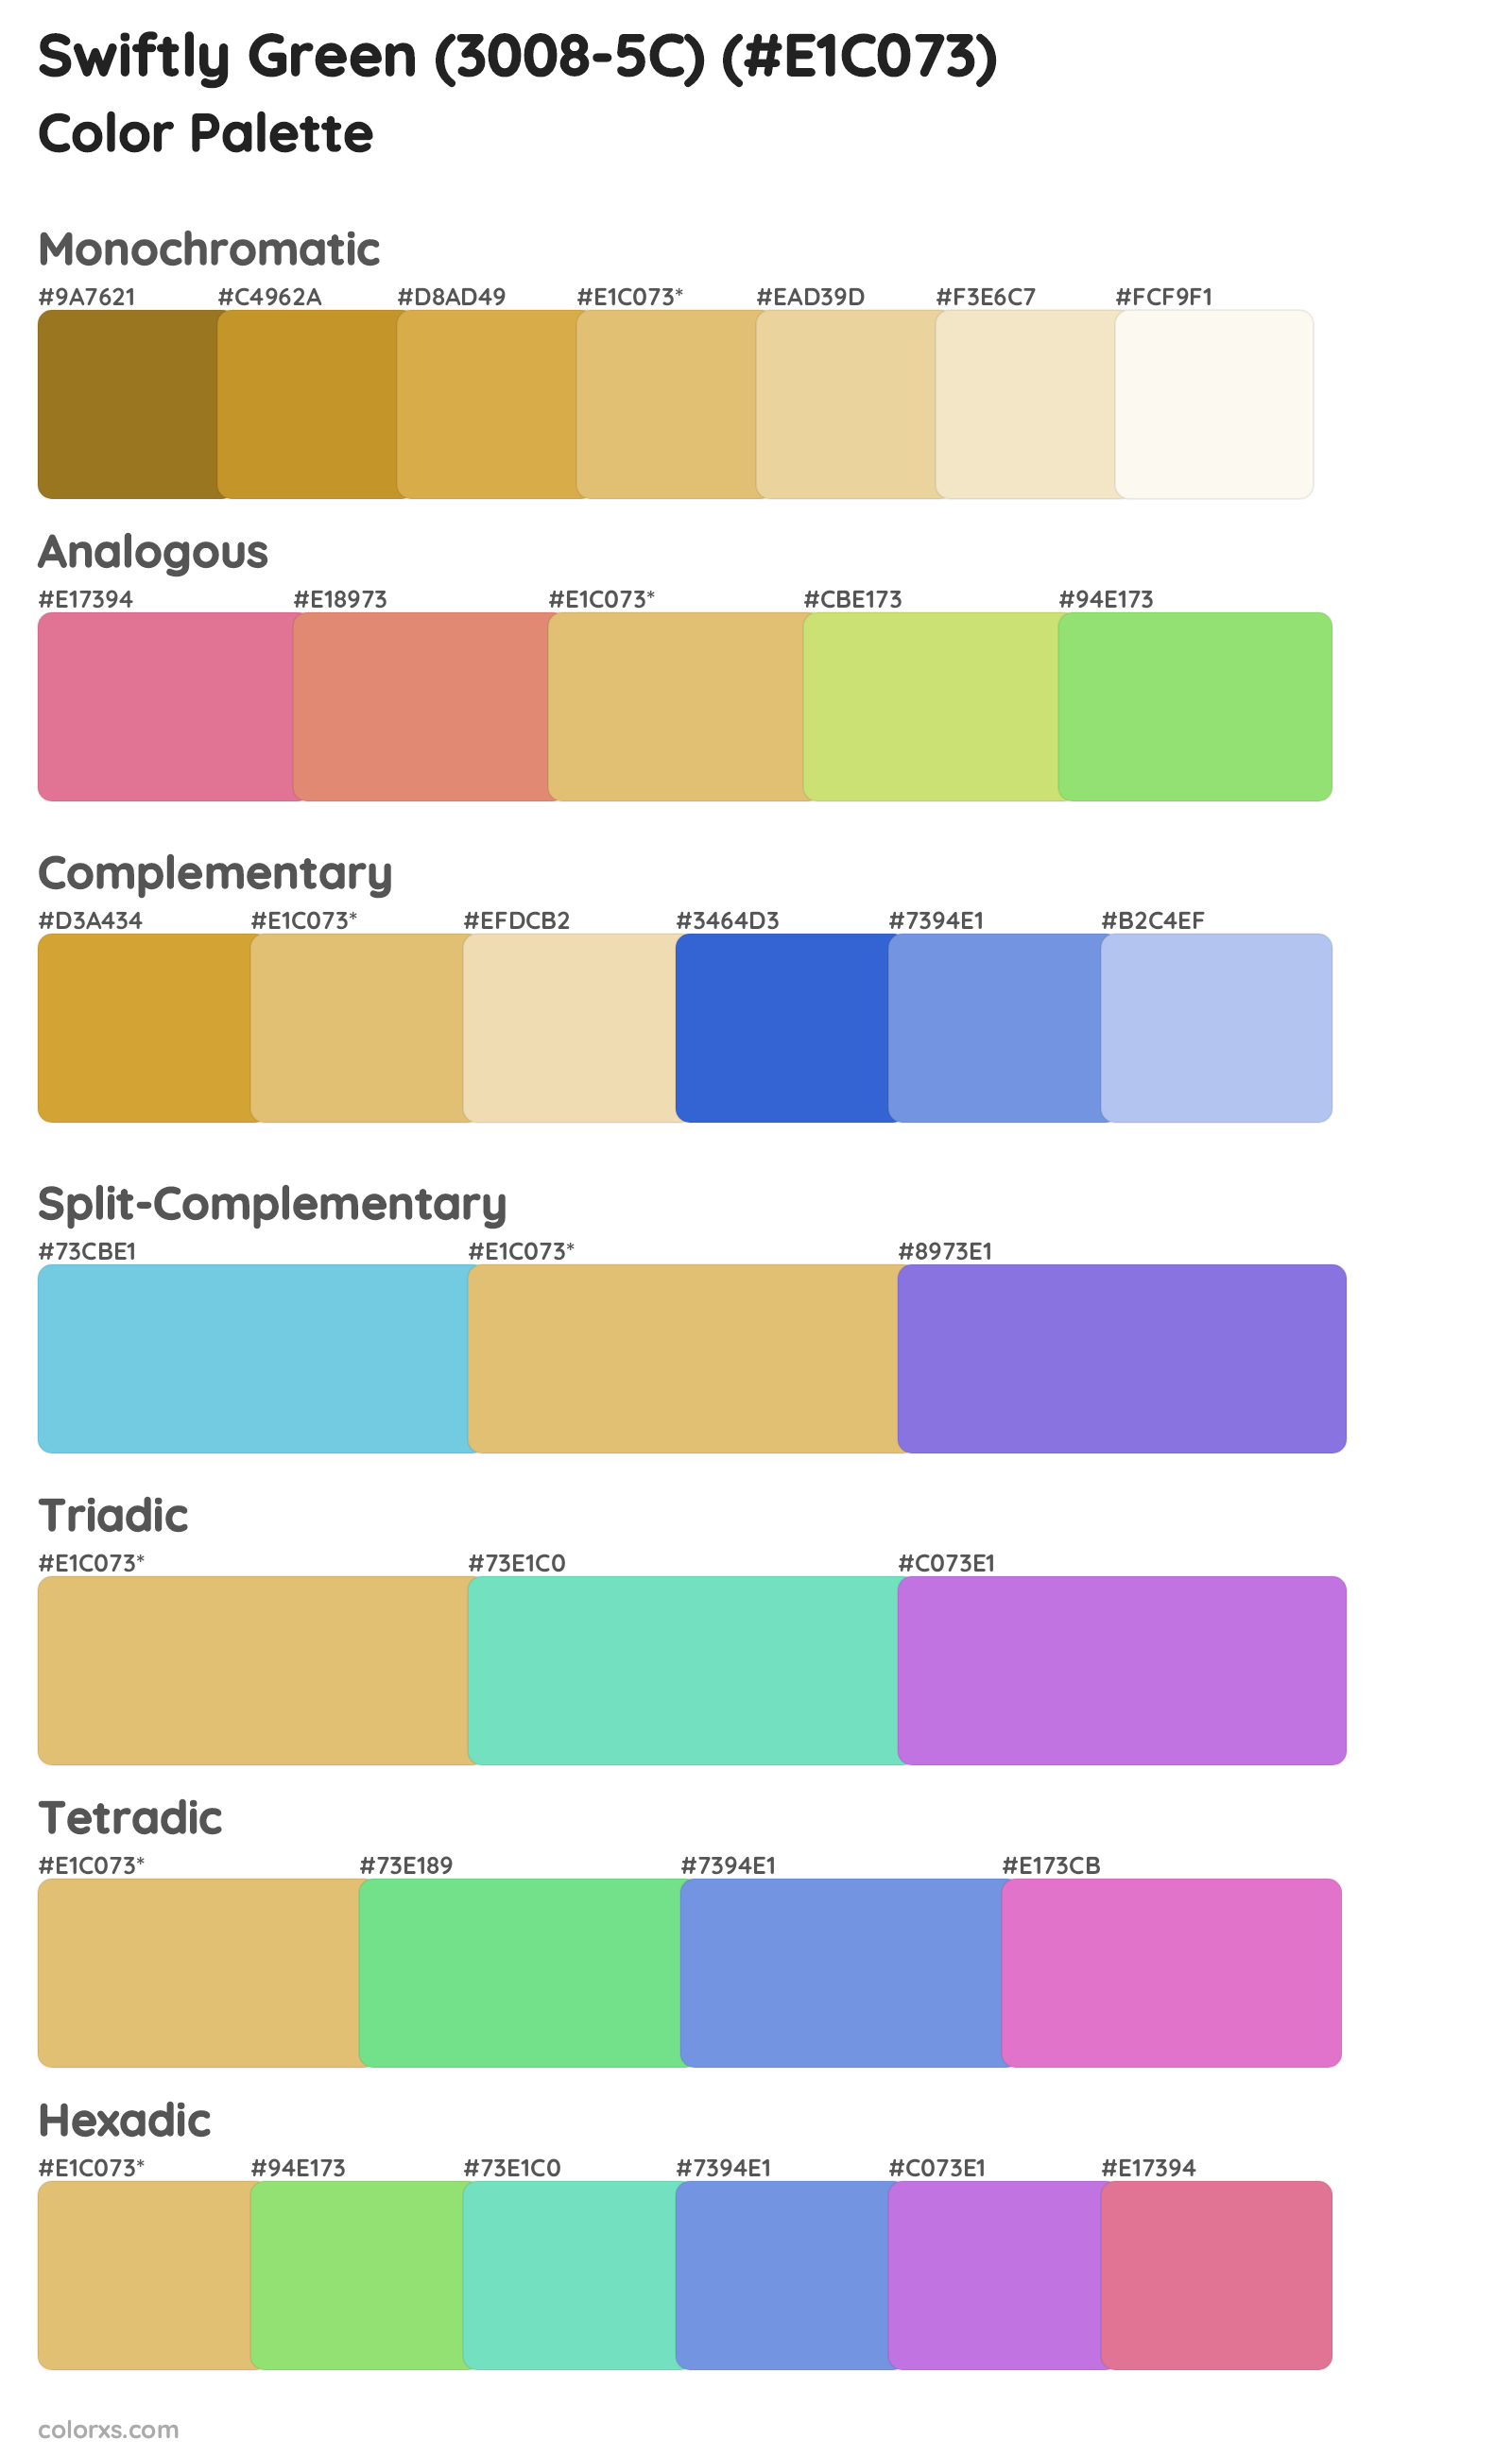 Swiftly Green (3008-5C) Color Scheme Palettes